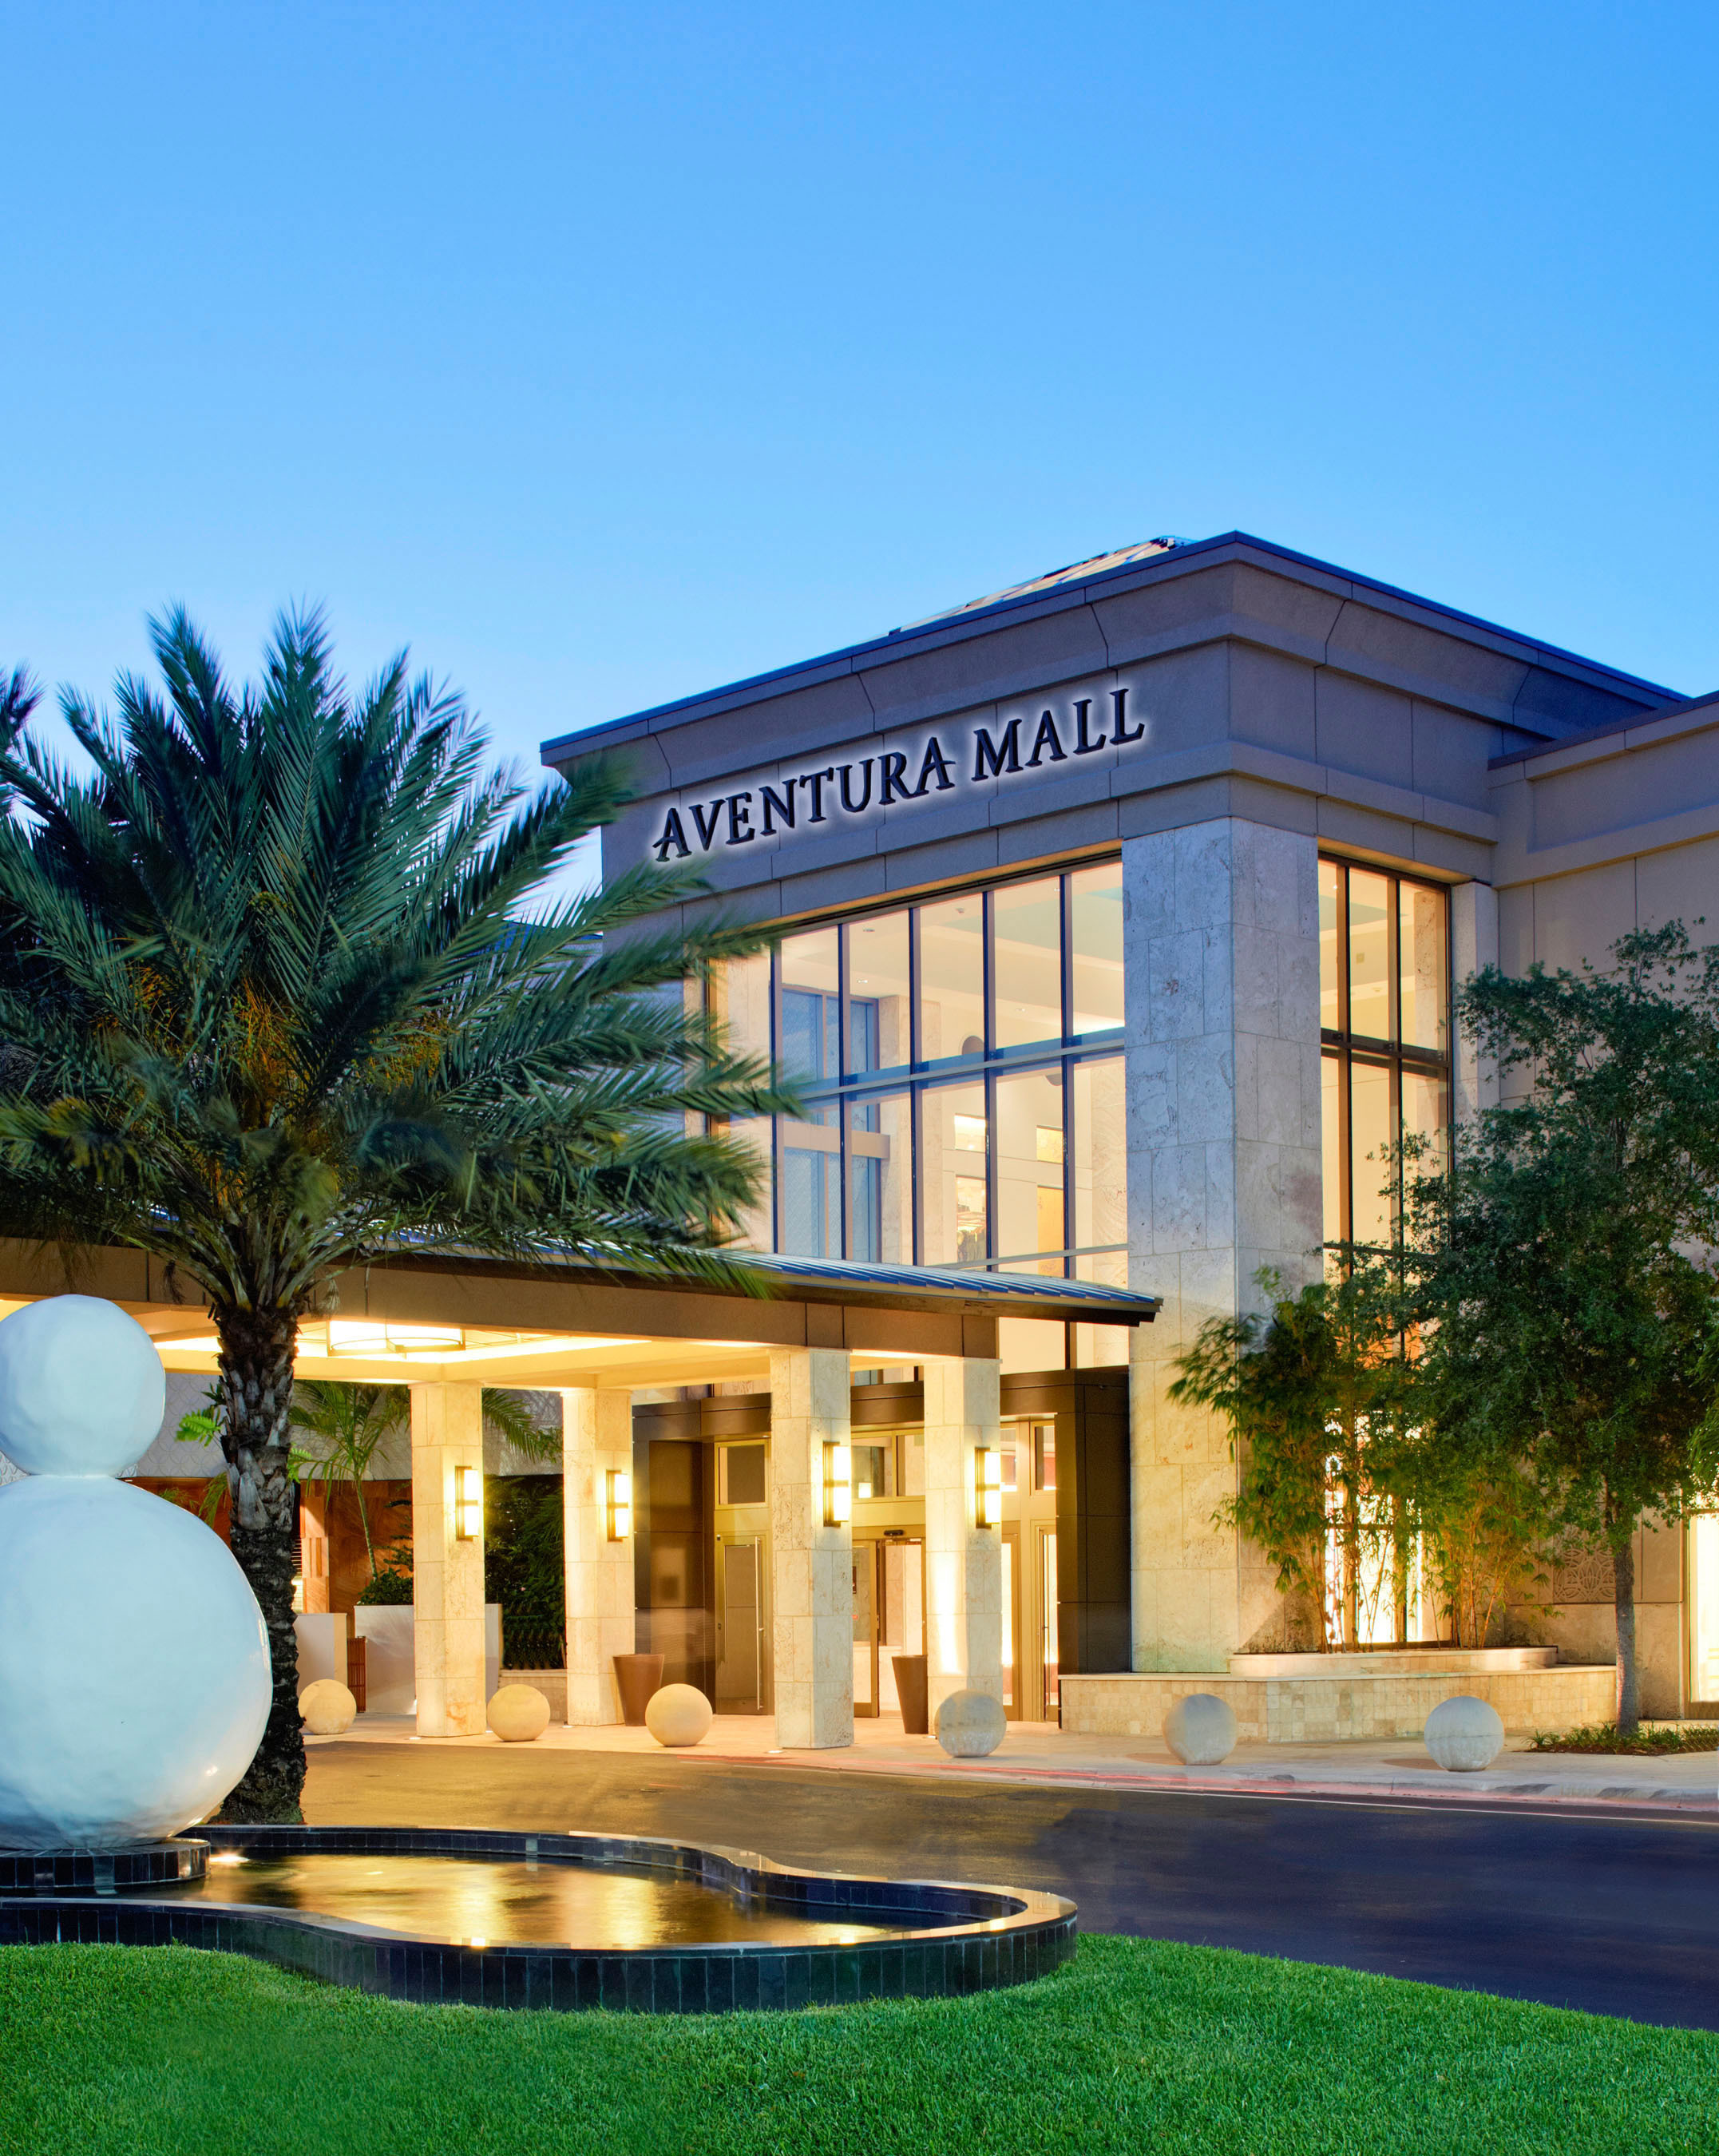 Aventura mall expansion a treat for shoppers (Photos) - South Florida  Business Journal